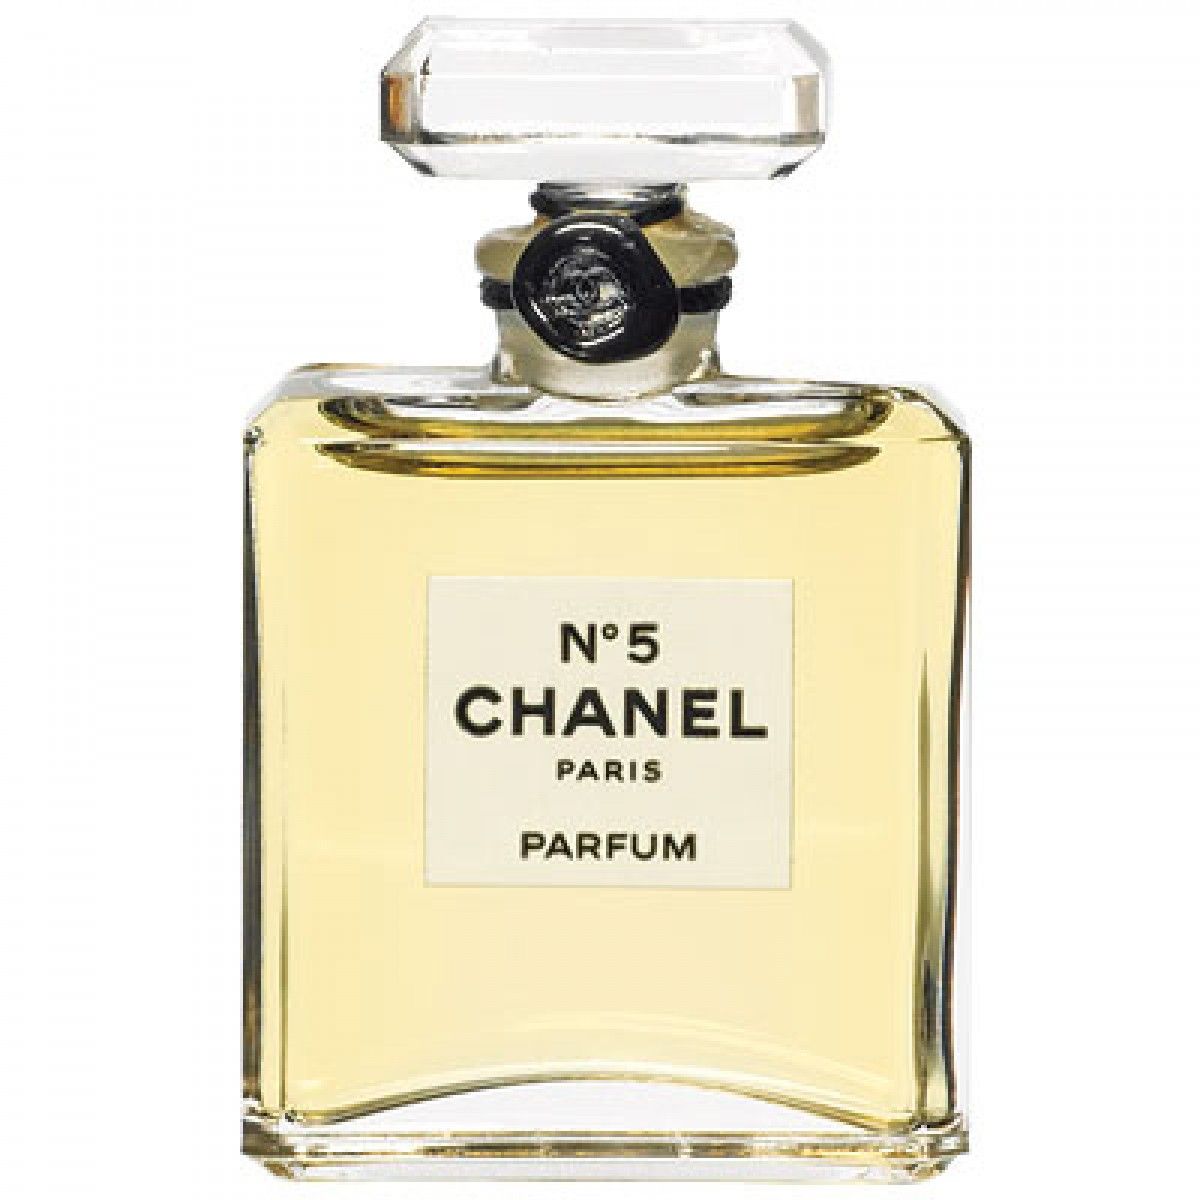 Hd Quality Wallpaper Chanel Perfume Number 5